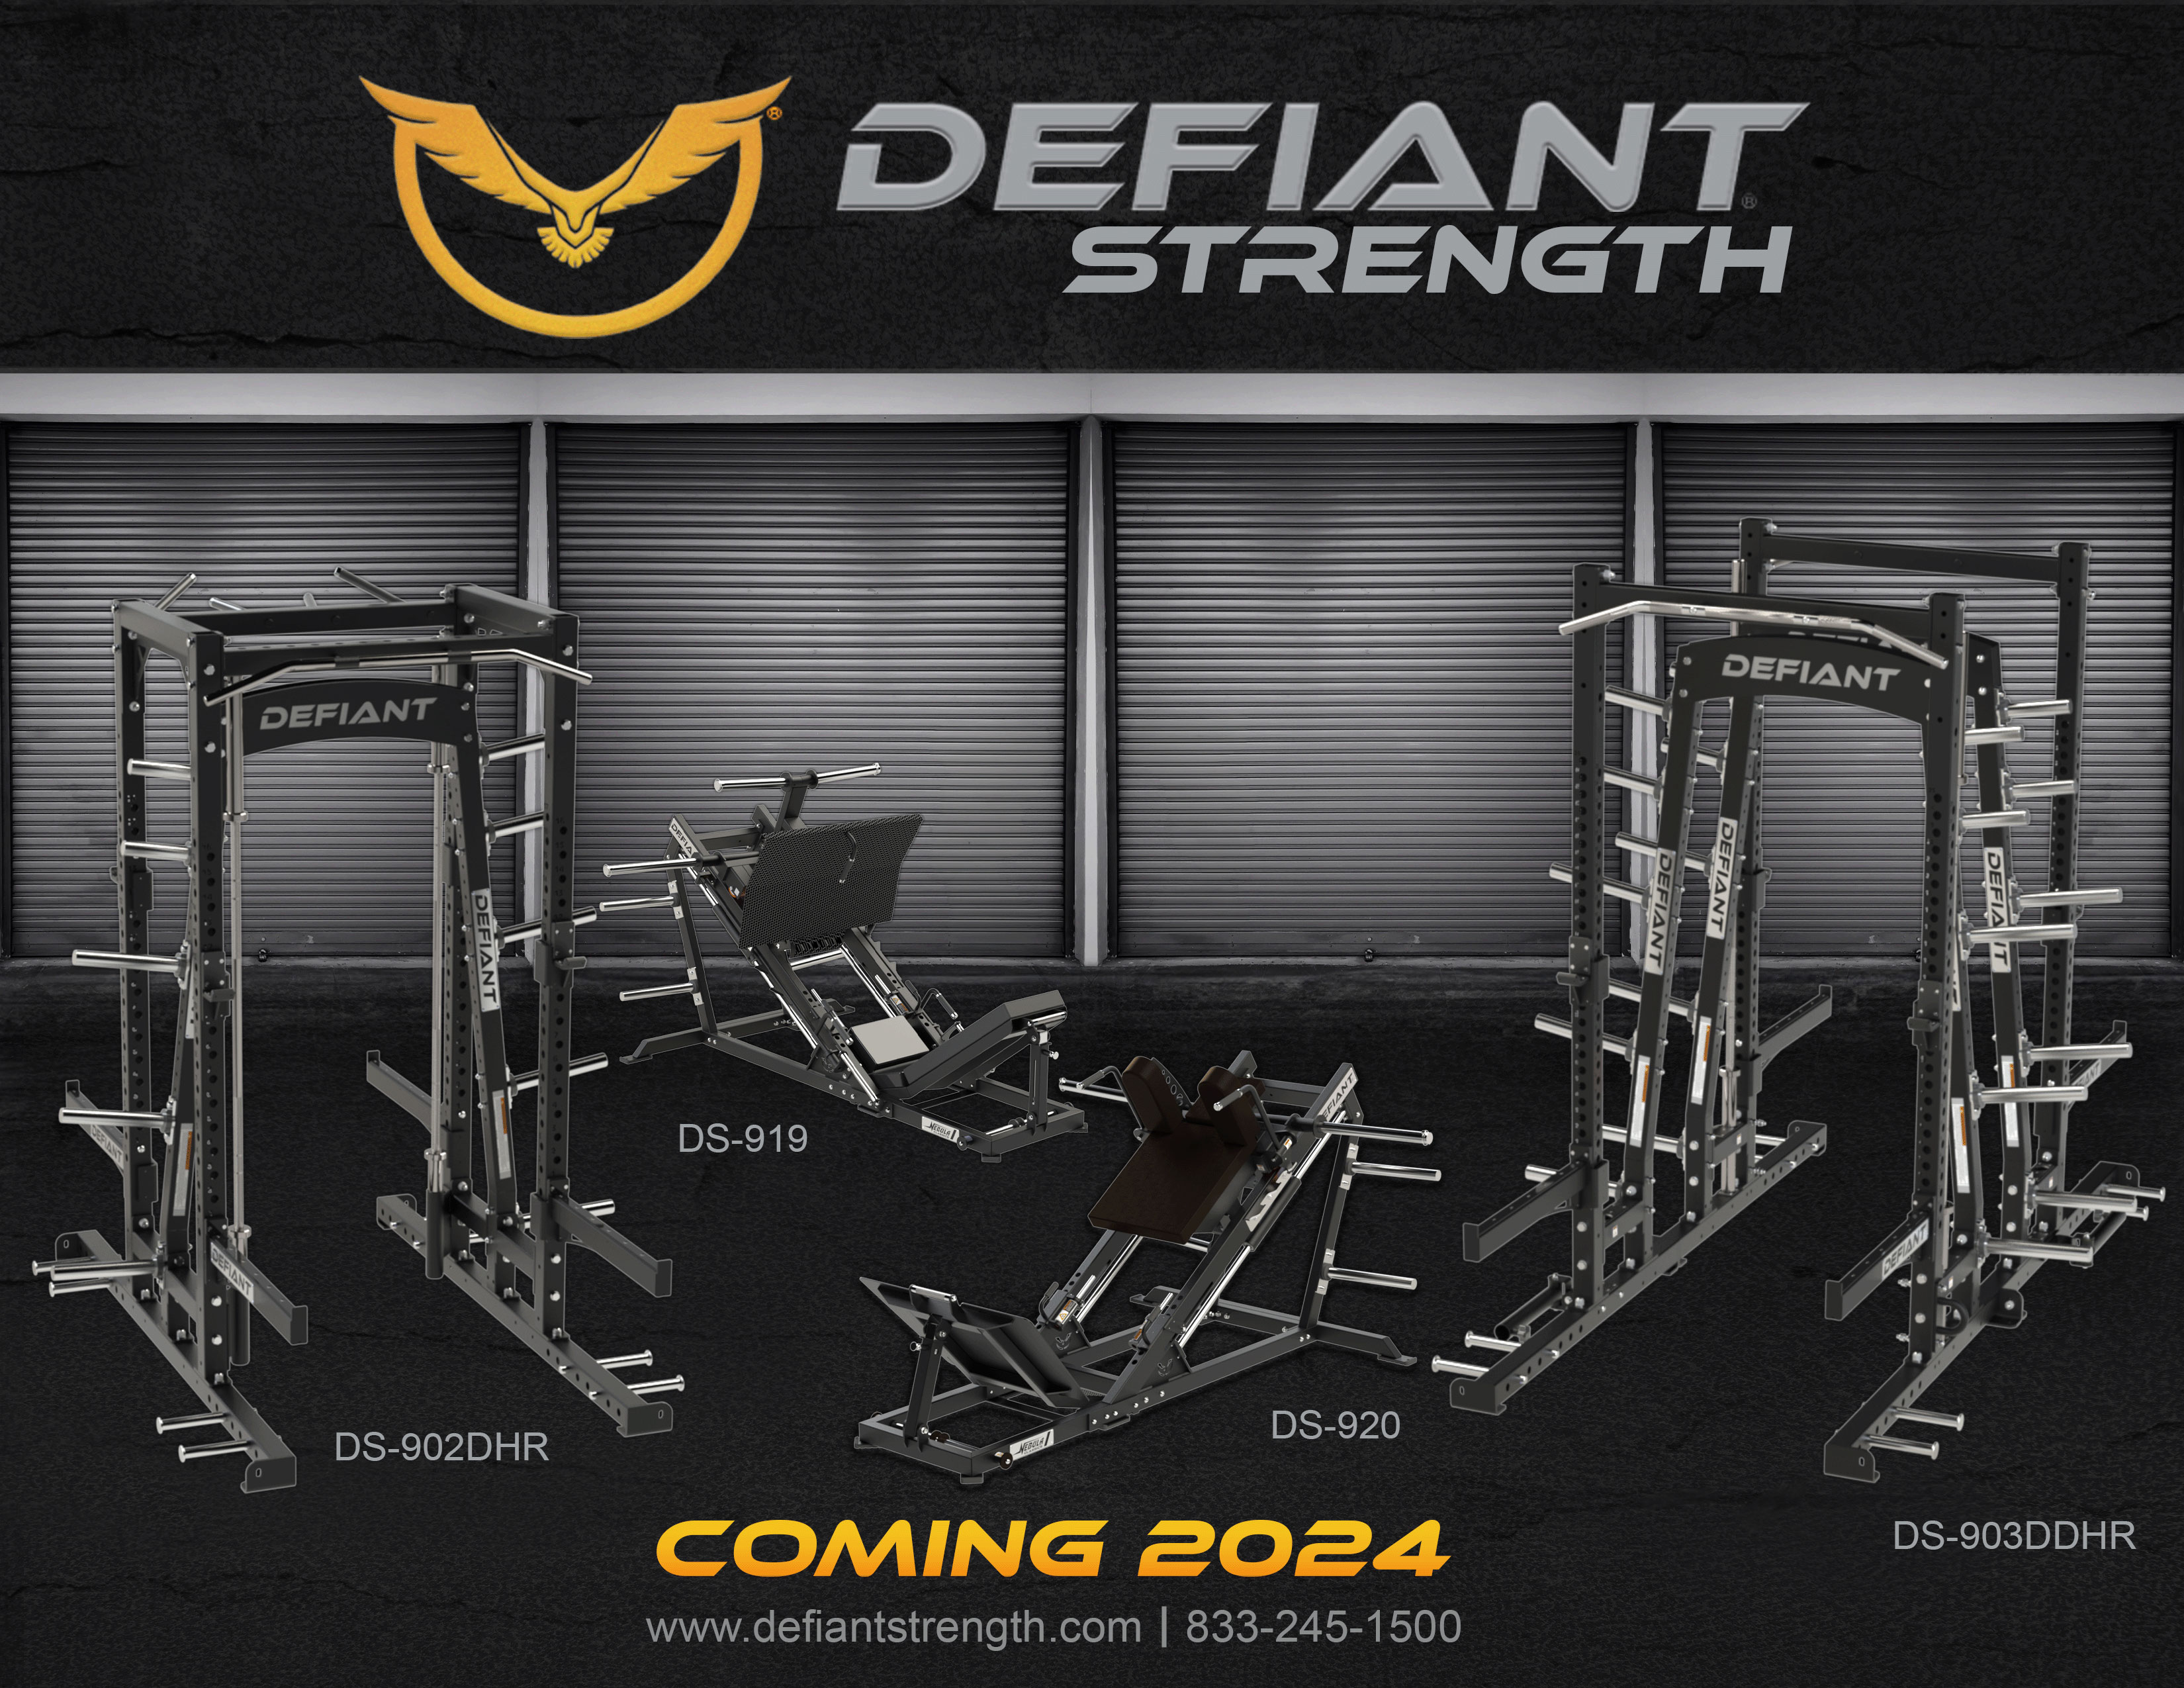 Defiant Strength: Coming 2024